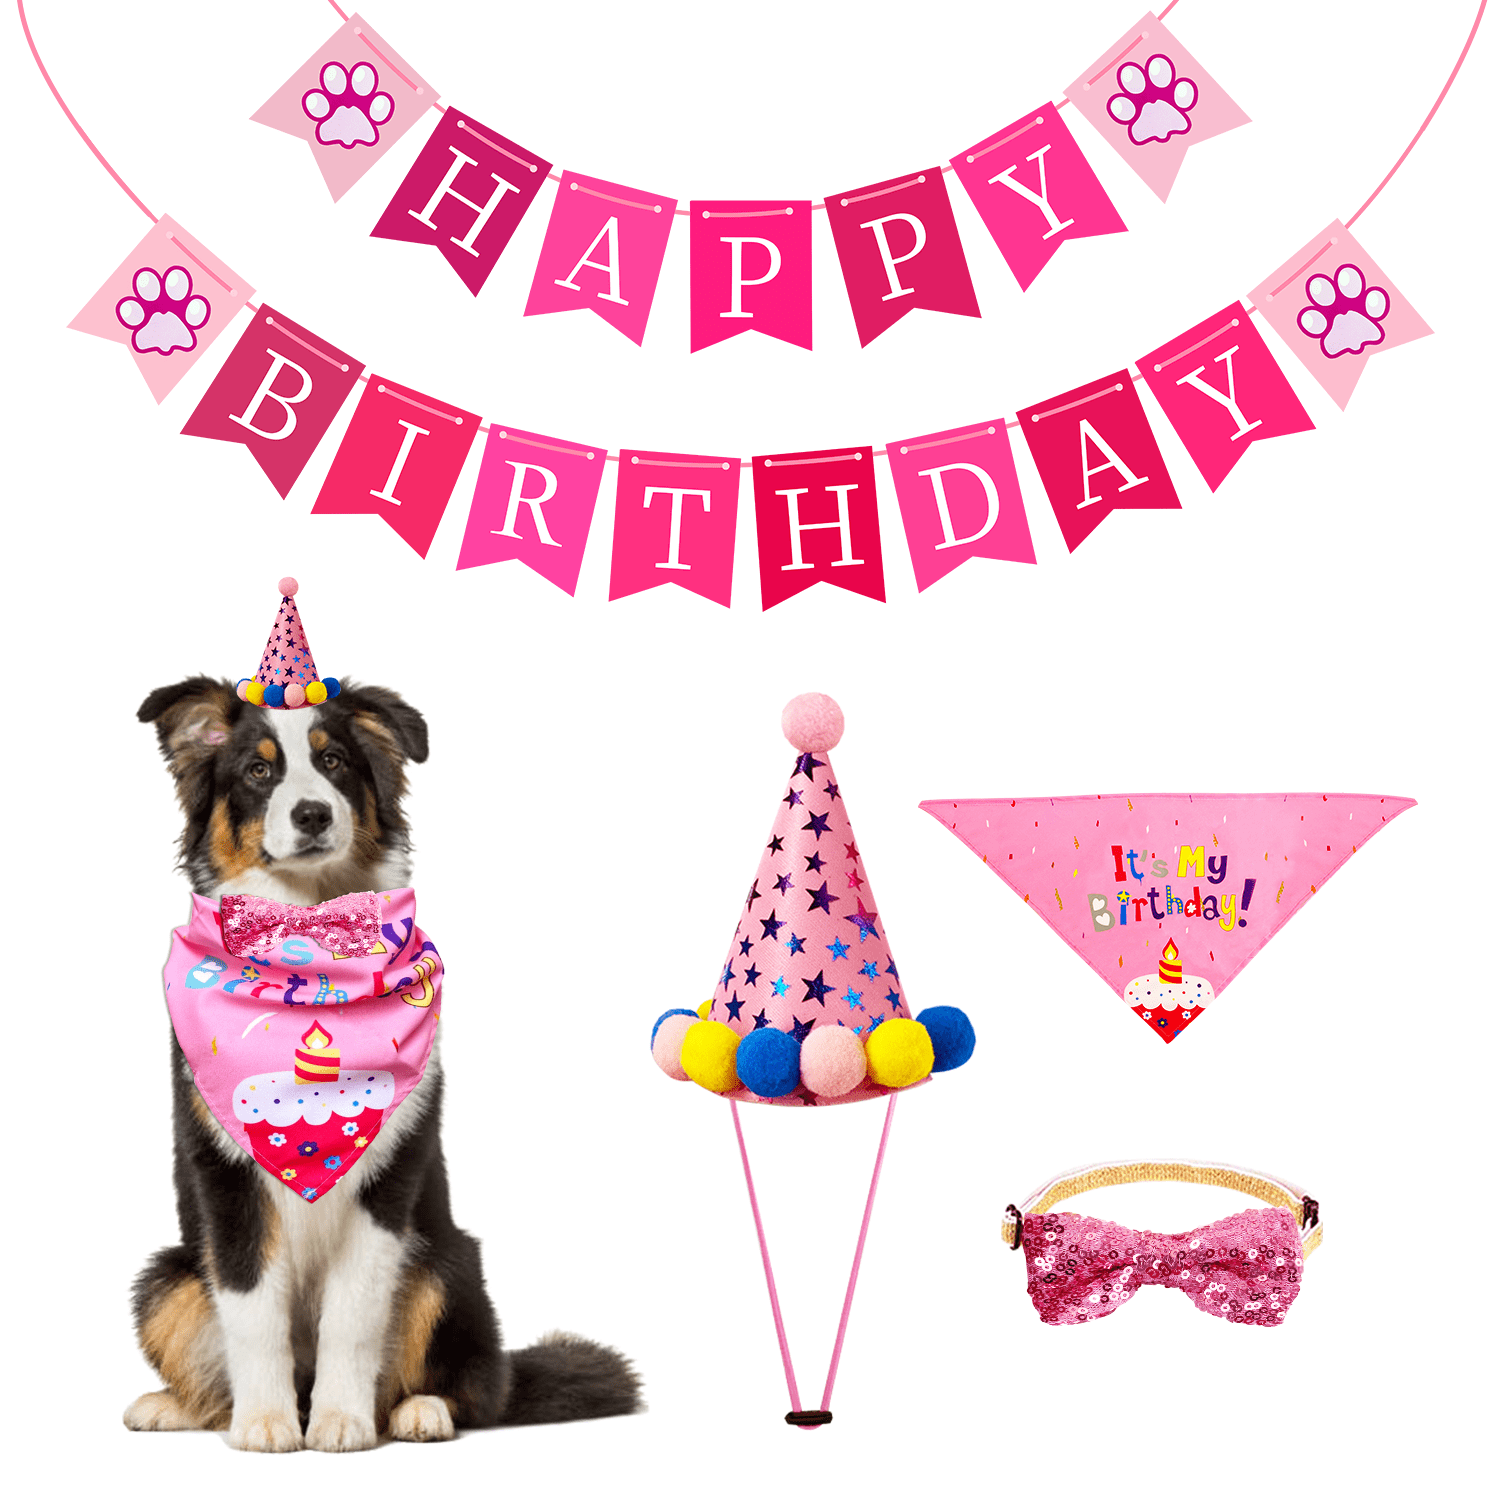 Animal Cute Dog Husky Pet Scarf Adjustable Washable Birthday Party Bandana for Small Medium Large Dogs and Cats